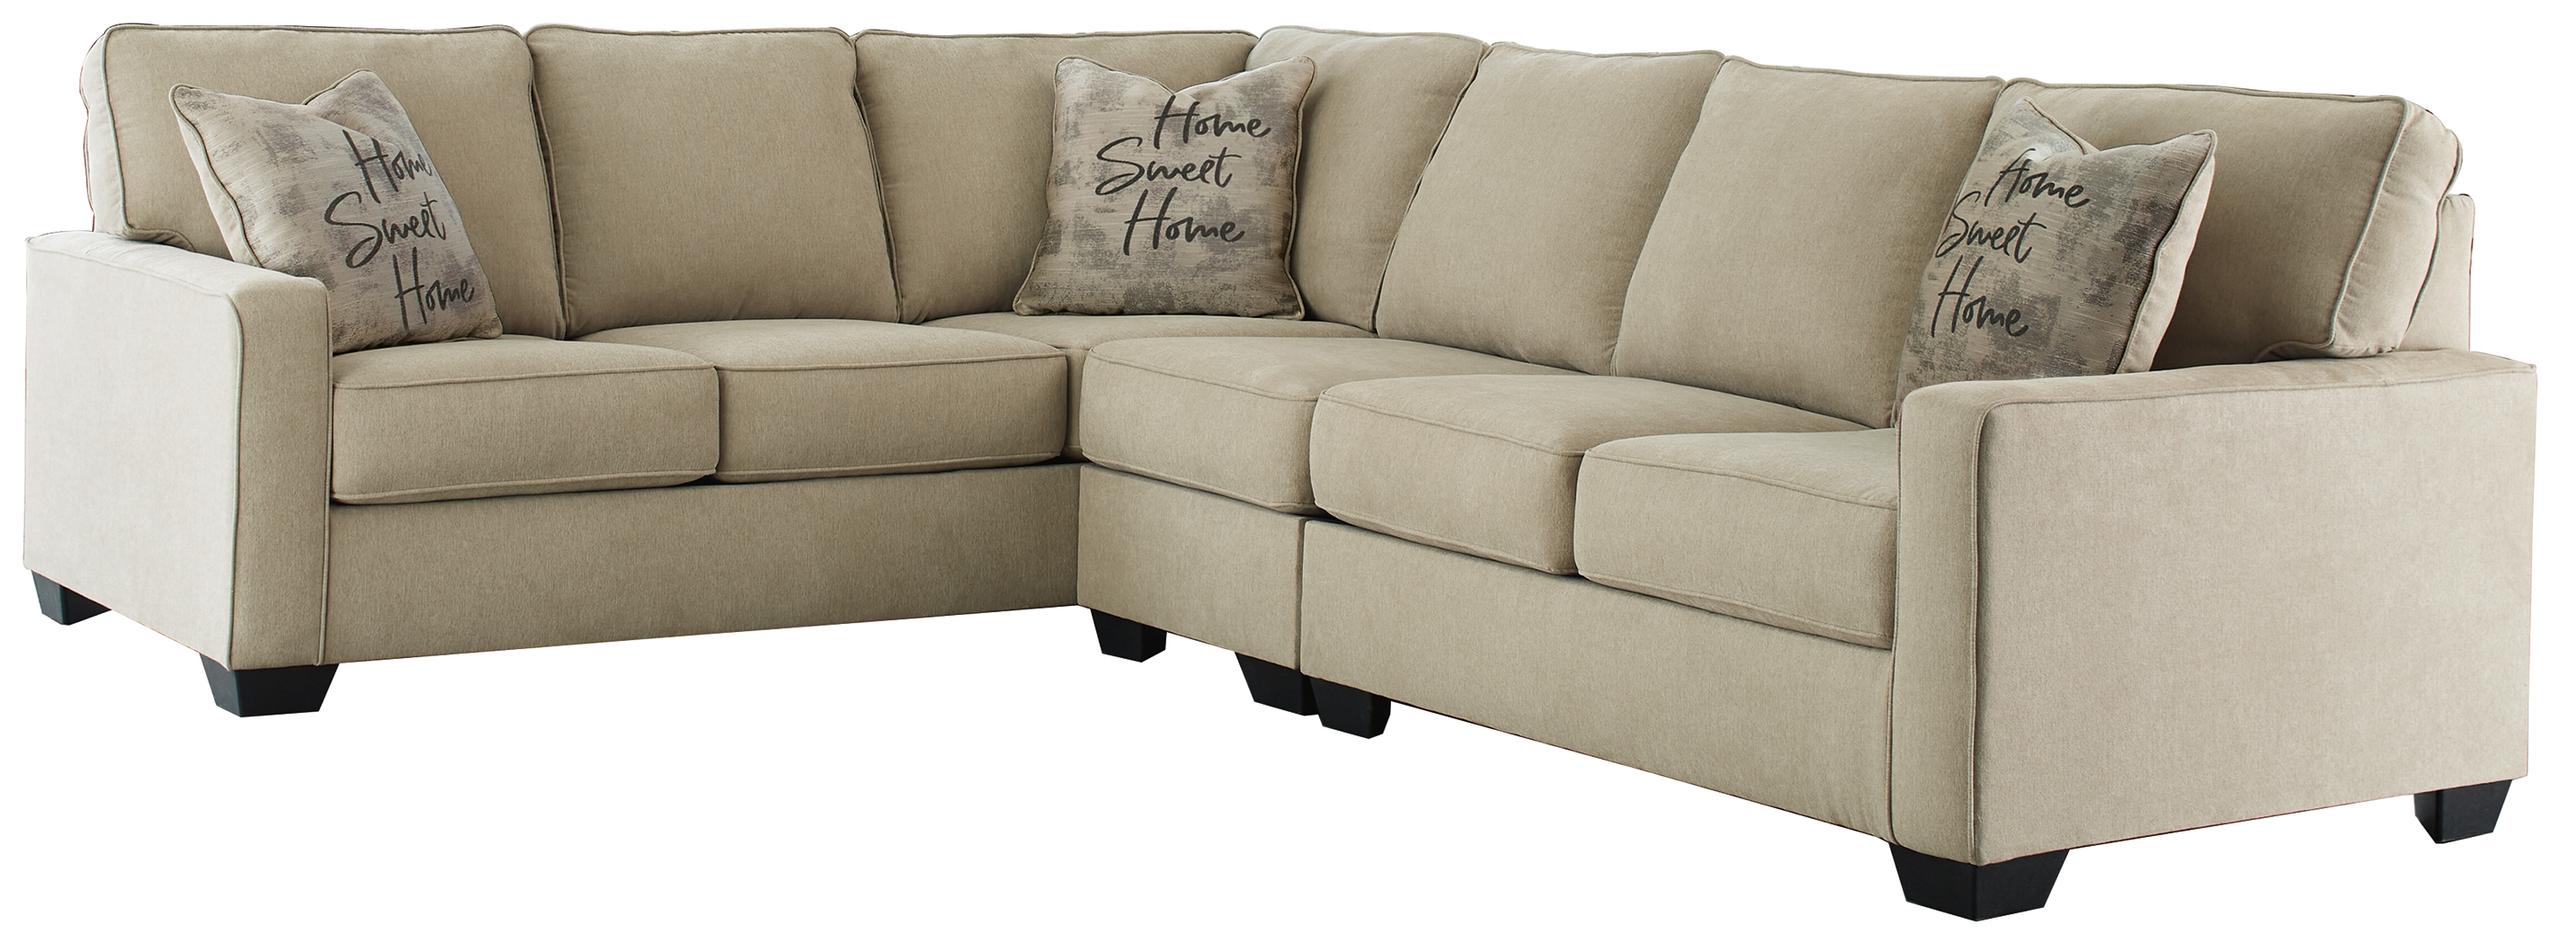 ASHLEY FURNITURE 59006S3 Lucina 3-piece Sectional